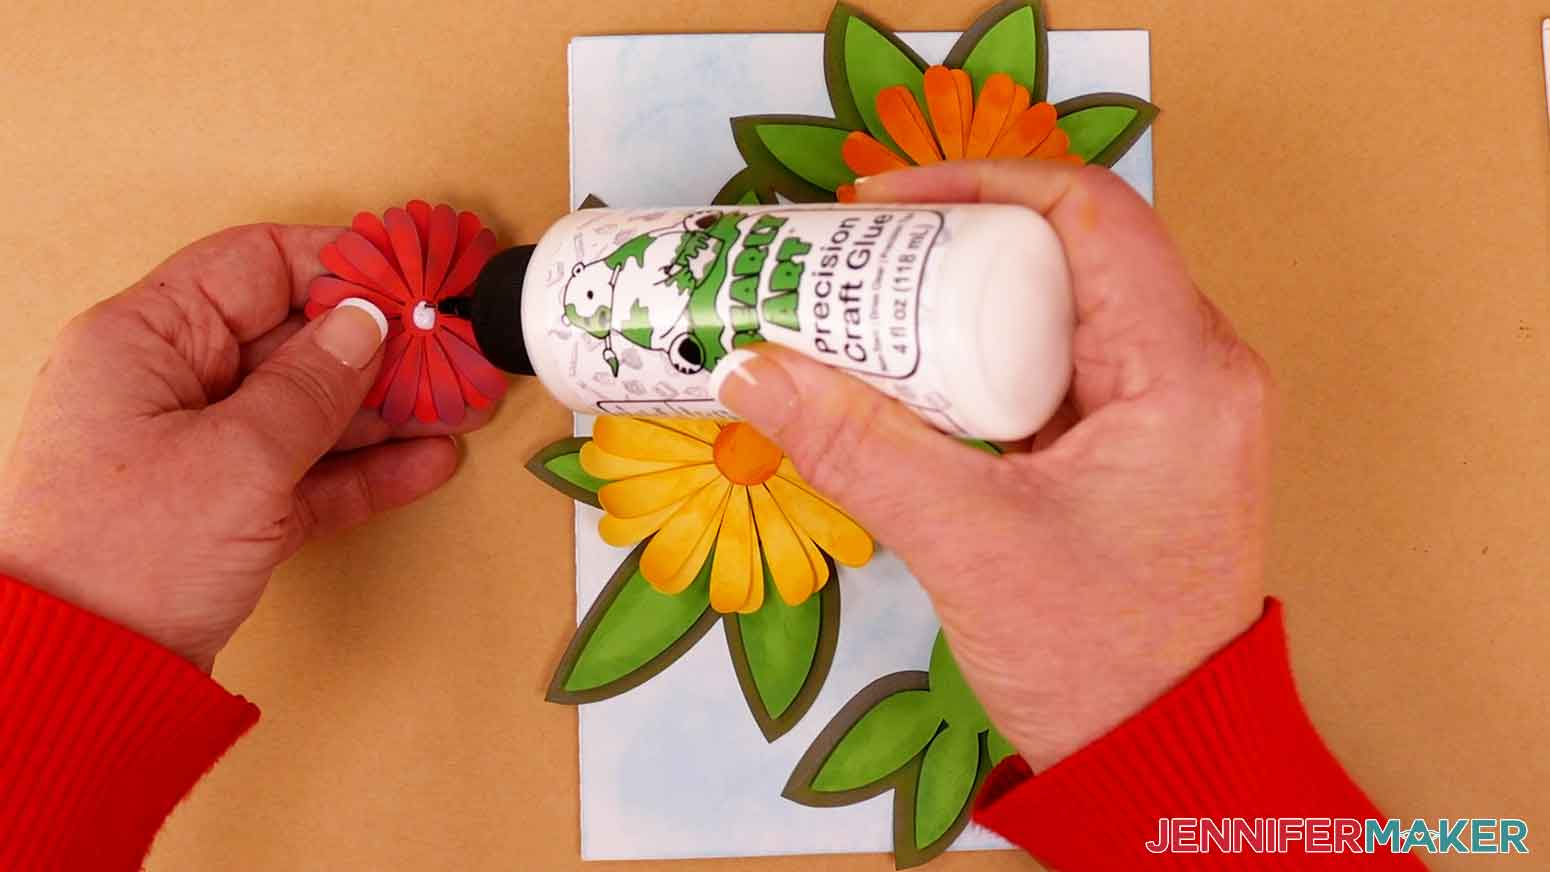 Apply craft glue to the back side of each daisy and attach them to the leaves on the card.